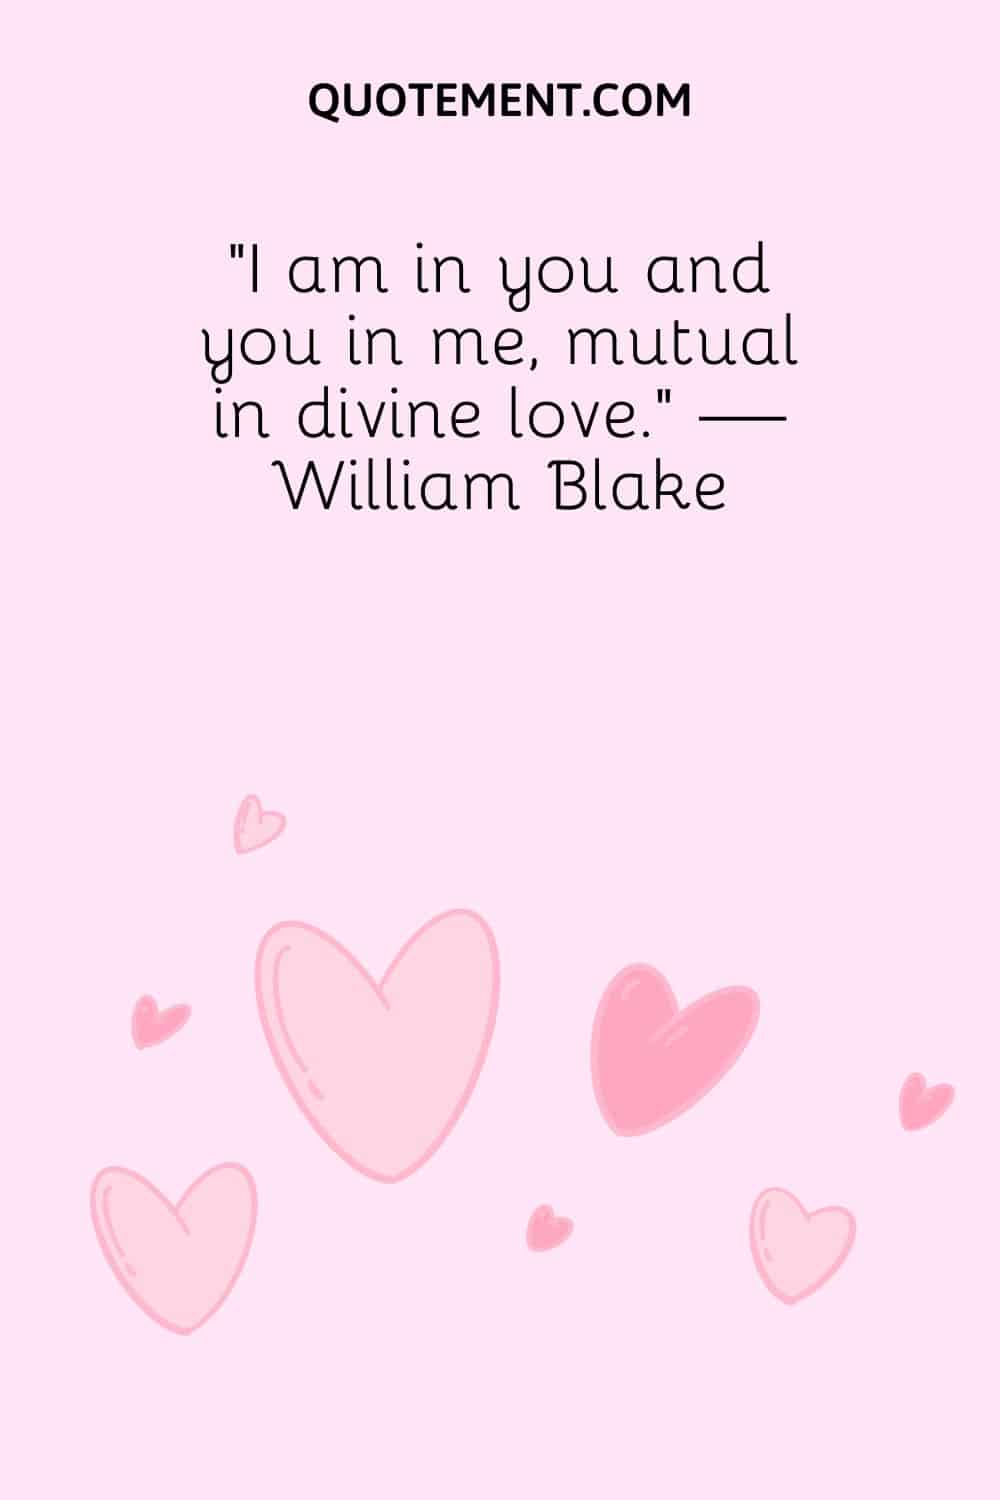 “I am in you and you in me, mutual in divine love.” — William Blake